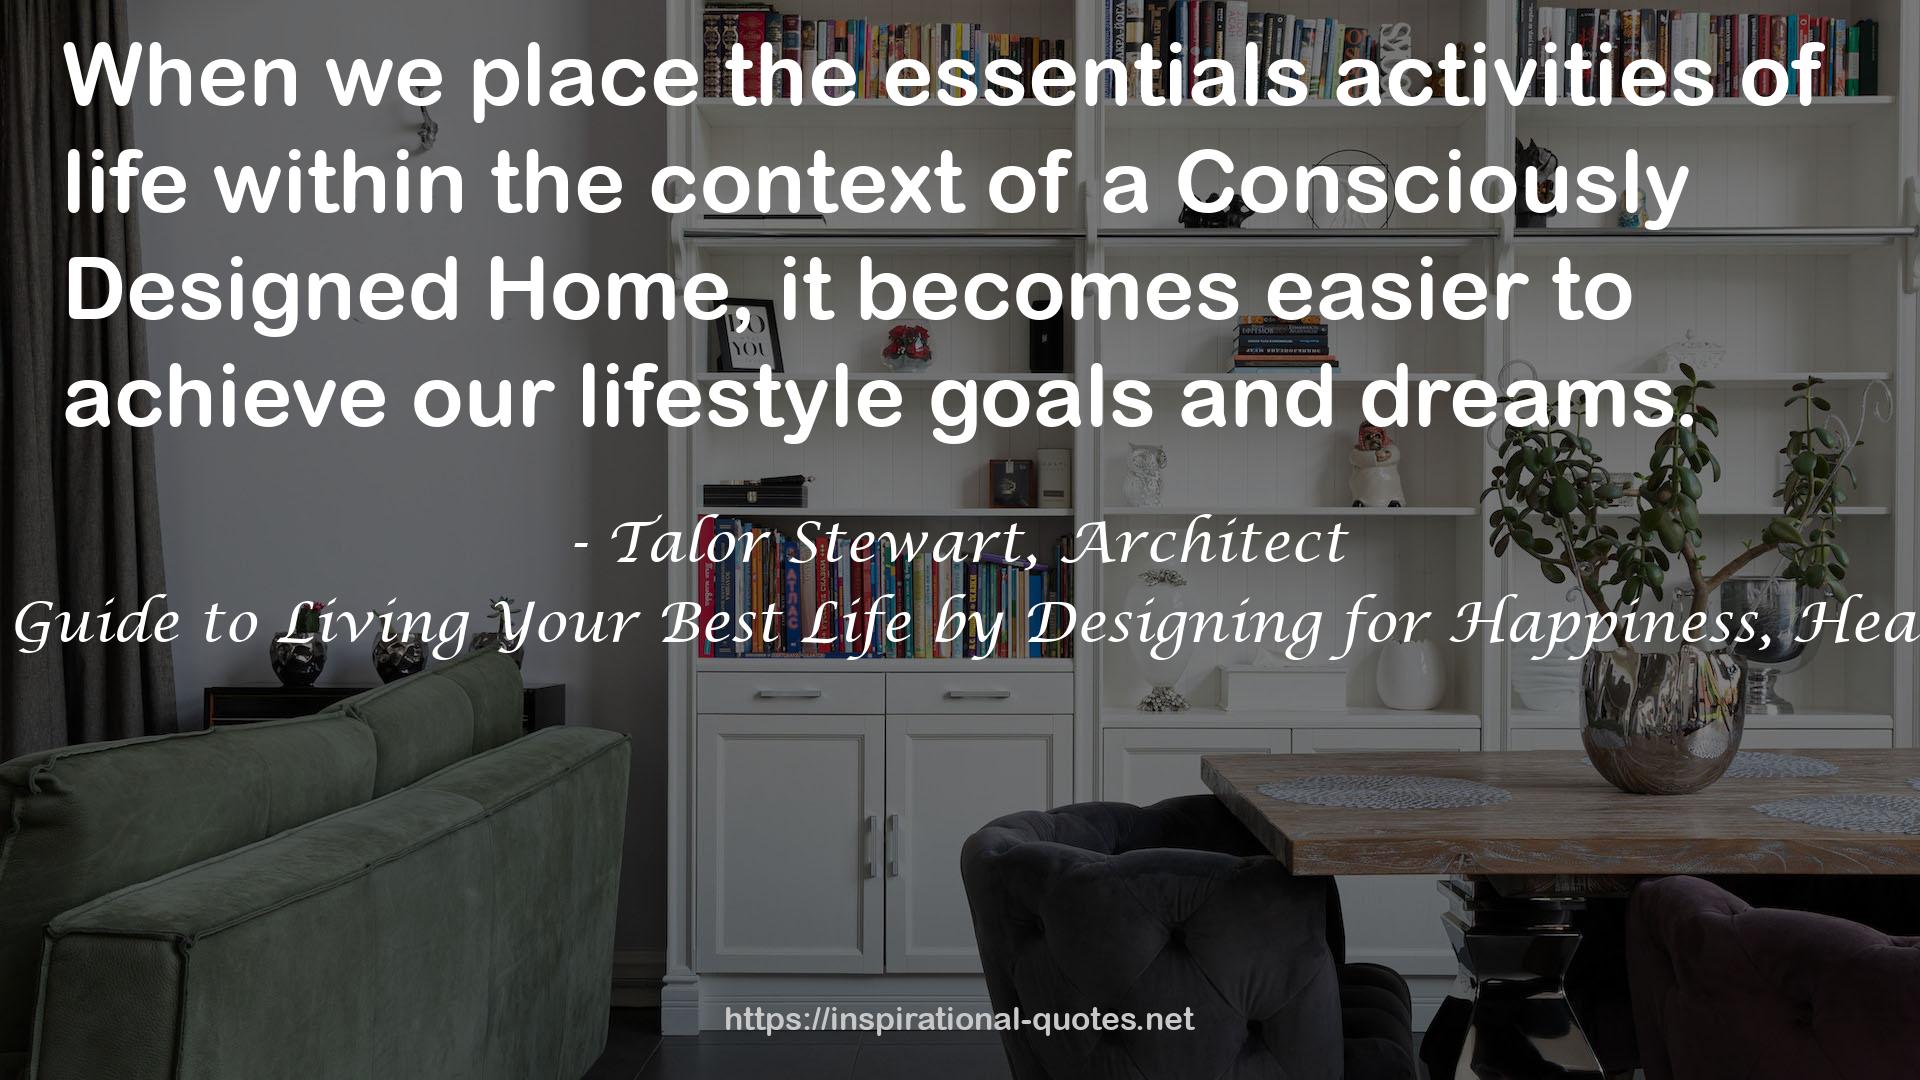 Conscious Home Design: The Guide to Living Your Best Life by Designing for Happiness, Health, and Relationship Success QUOTES